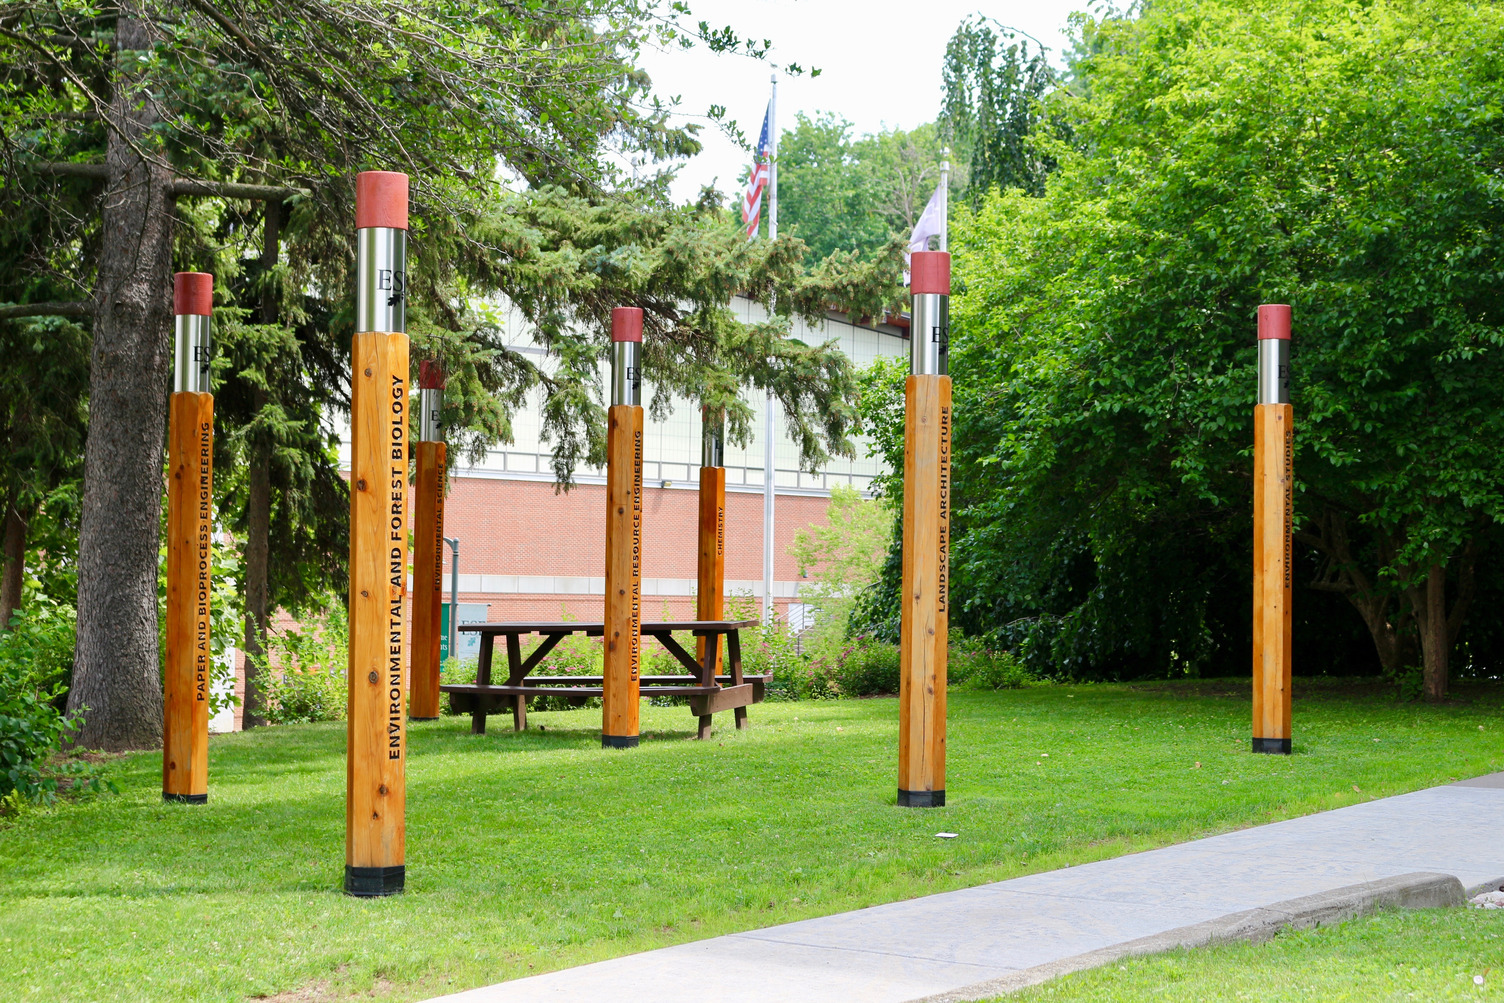 Pencil shaped columns with names of academic departments at ESF